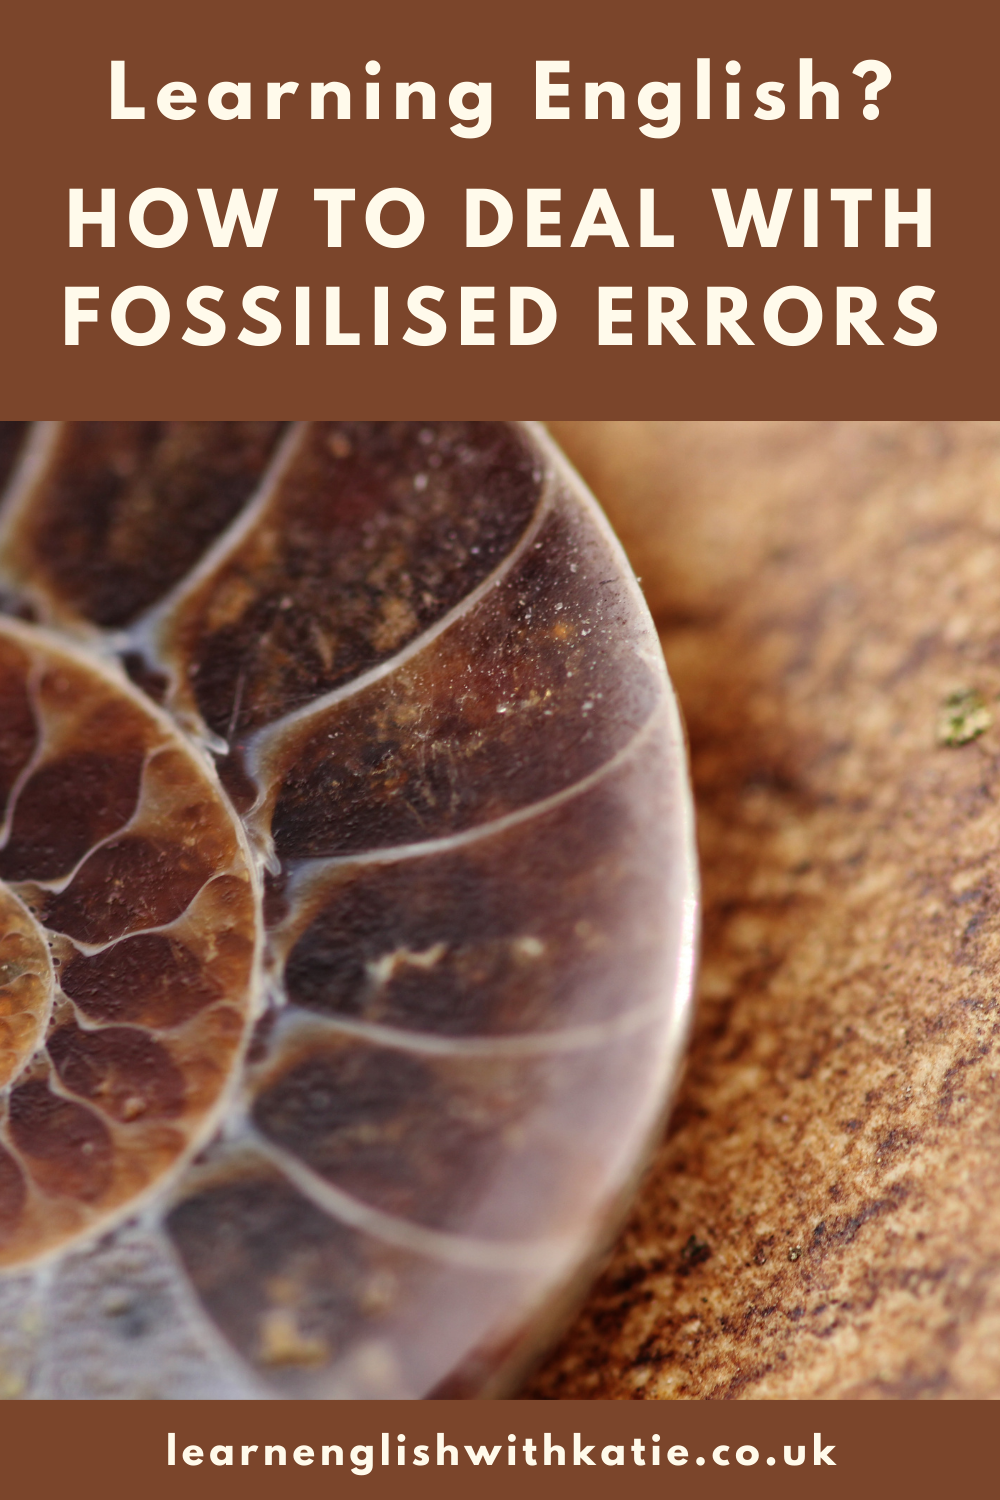 Pinterest pin showing image of a fossil